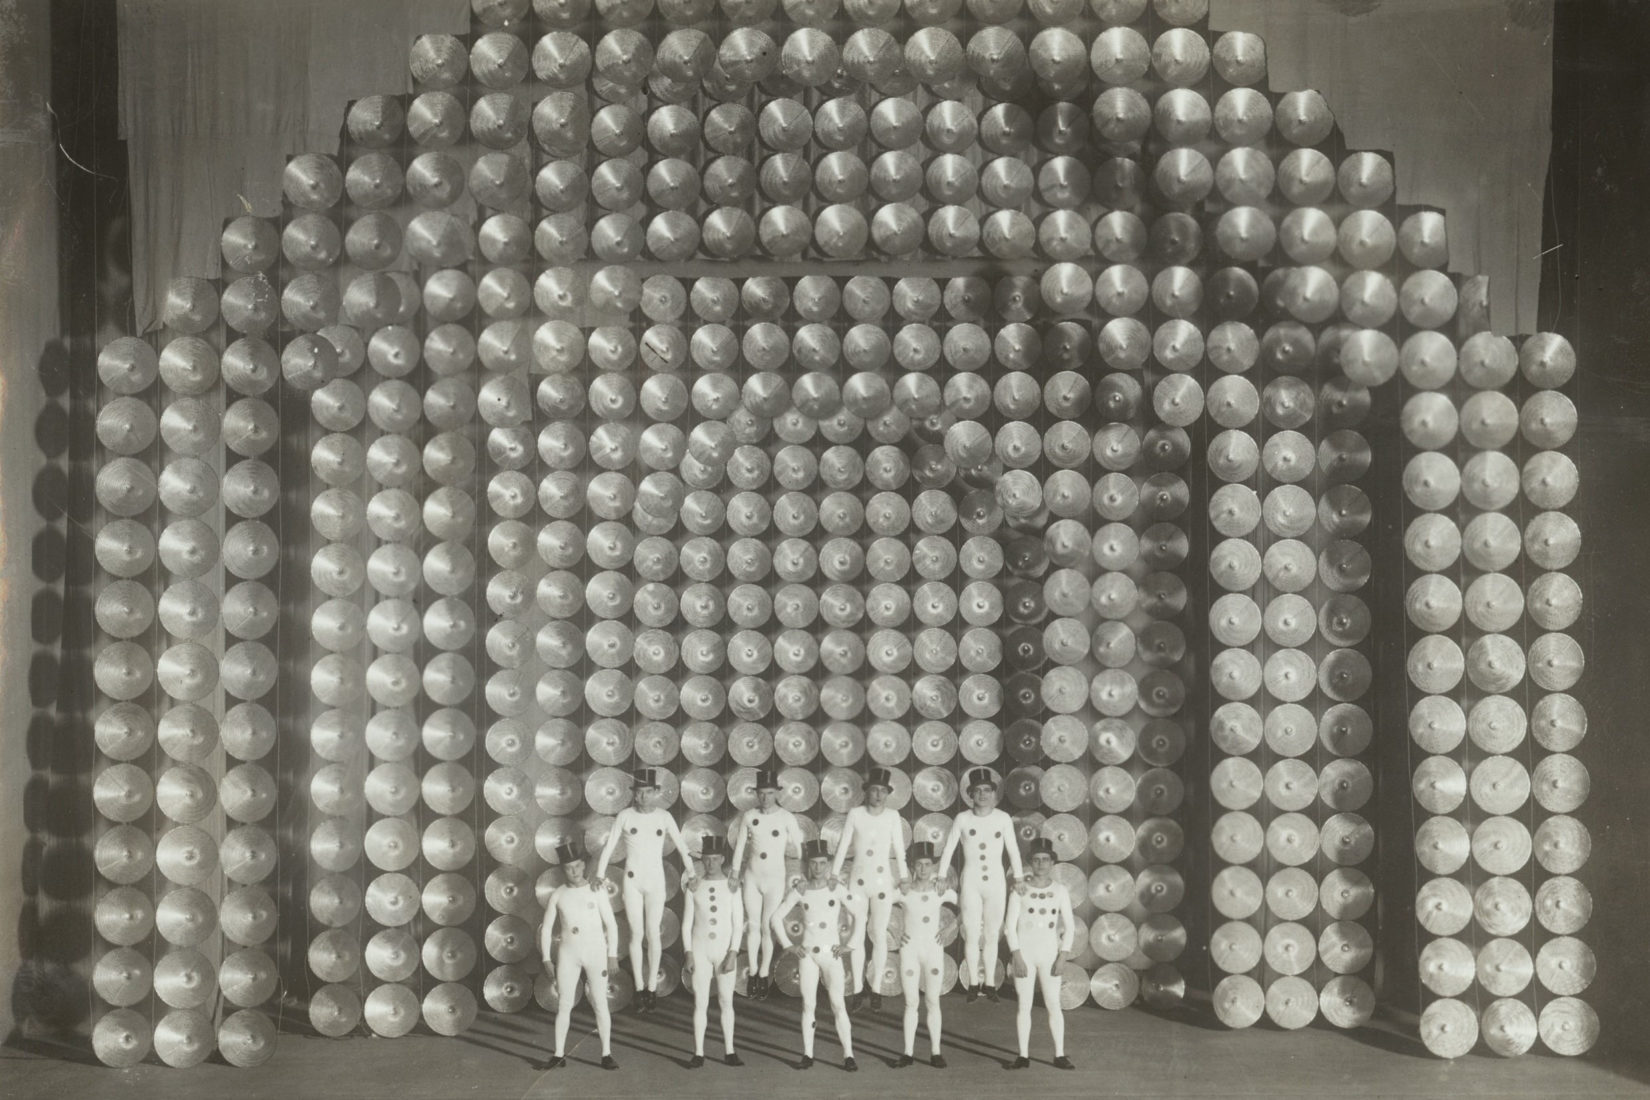 Black and white archive image of the Ballets suédois. Nine dancers stand in a formation in front of a stage set.